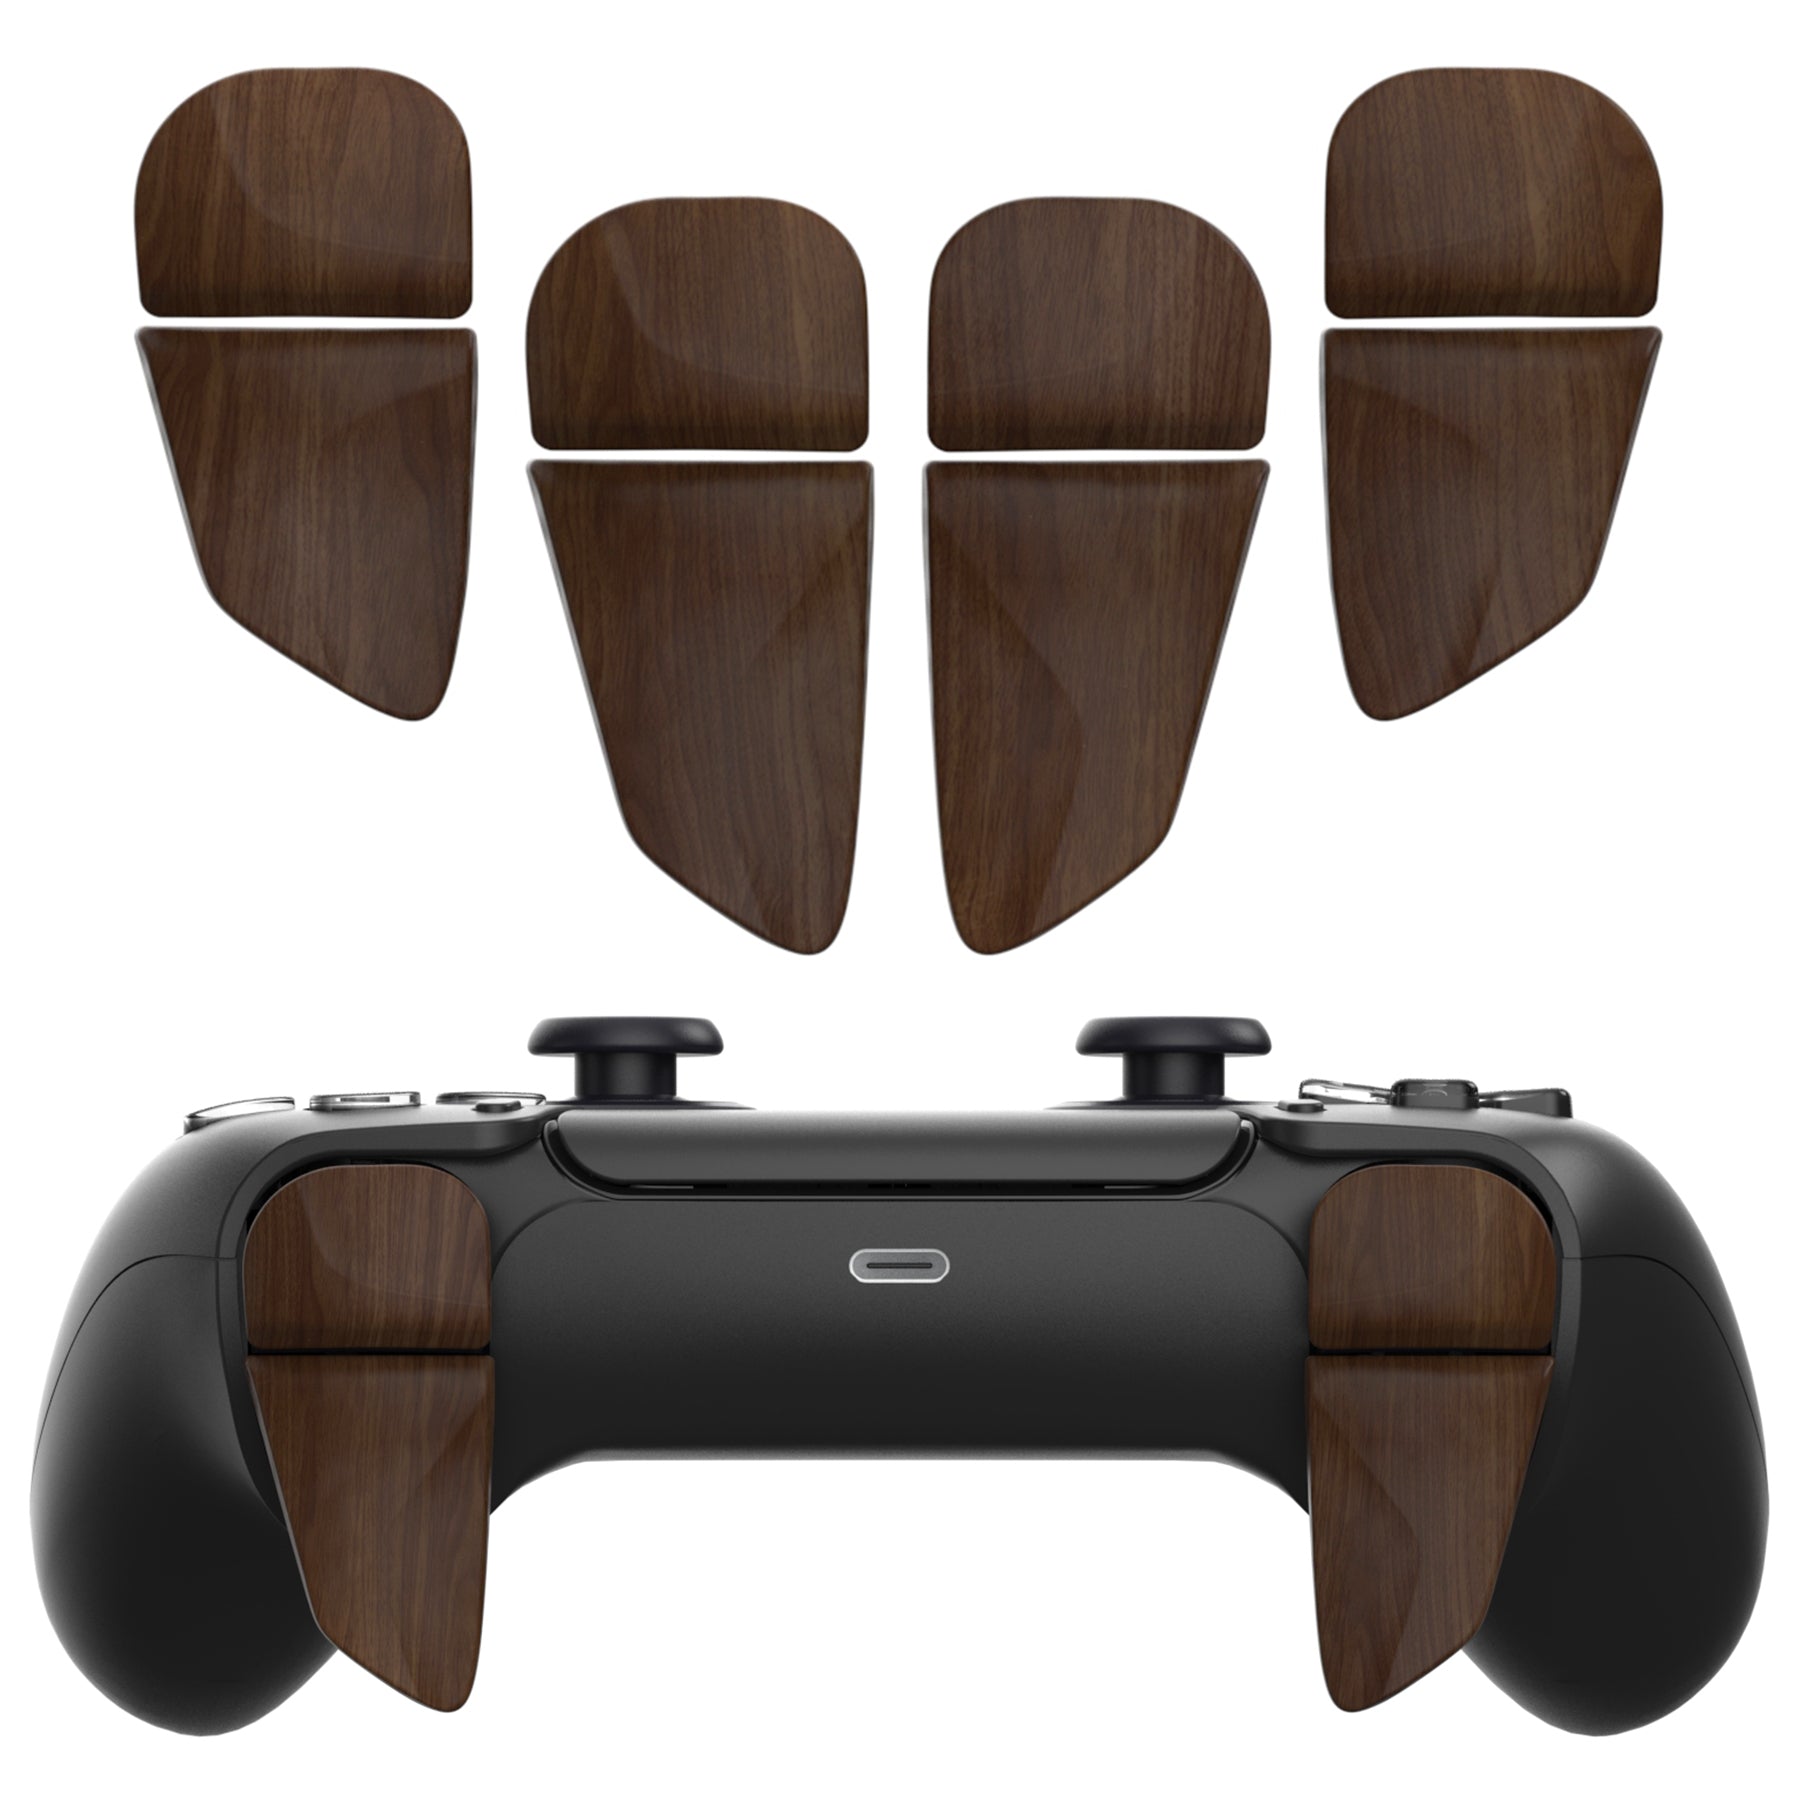 PlayVital Wood Grain 2 Pair Shoulder Buttons Extension Triggers for PS5 Controller, Game Improvement Adjusters for PS5 Controller, Bumper Trigger Extenders for PS5 Controller - PFPJ143 PlayVital